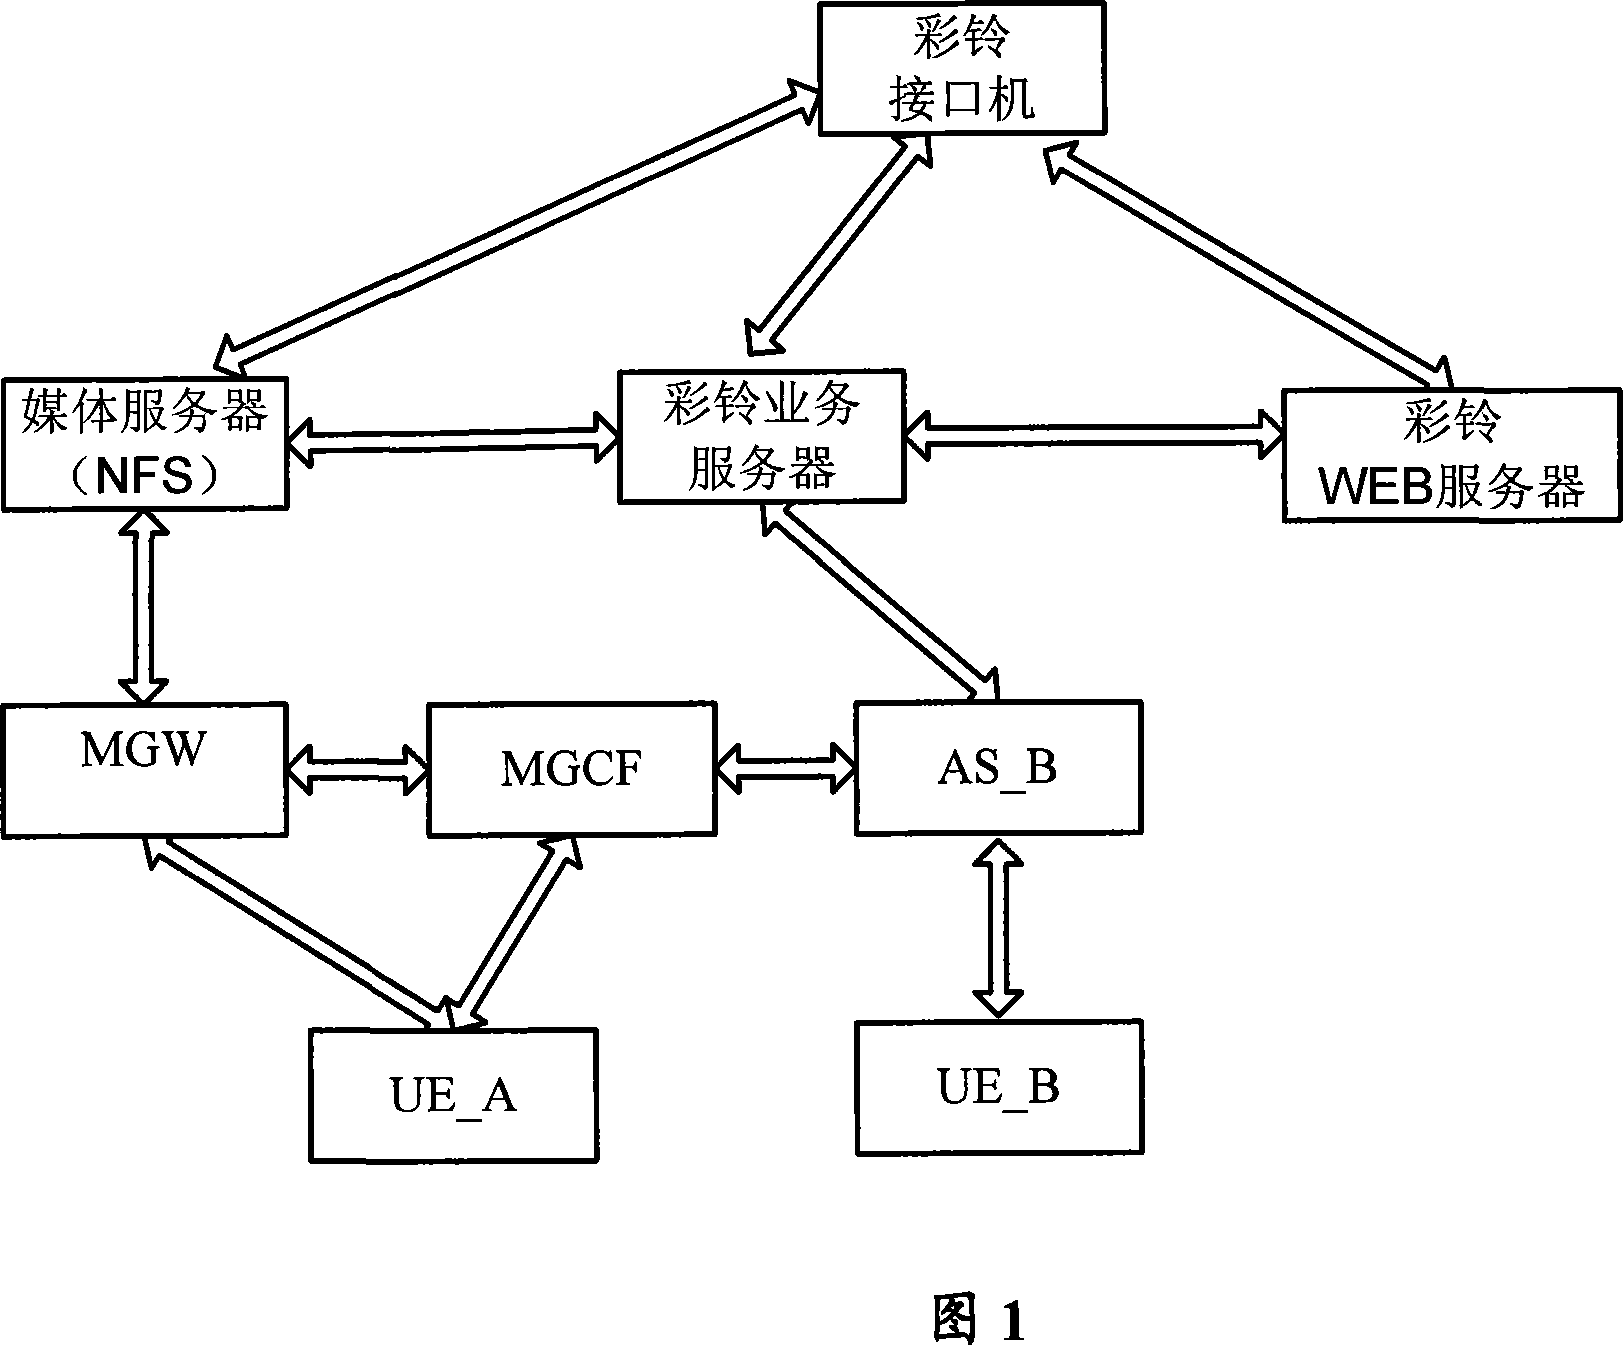 Method for implementing color bell service interaction of PSTN user and IMS user